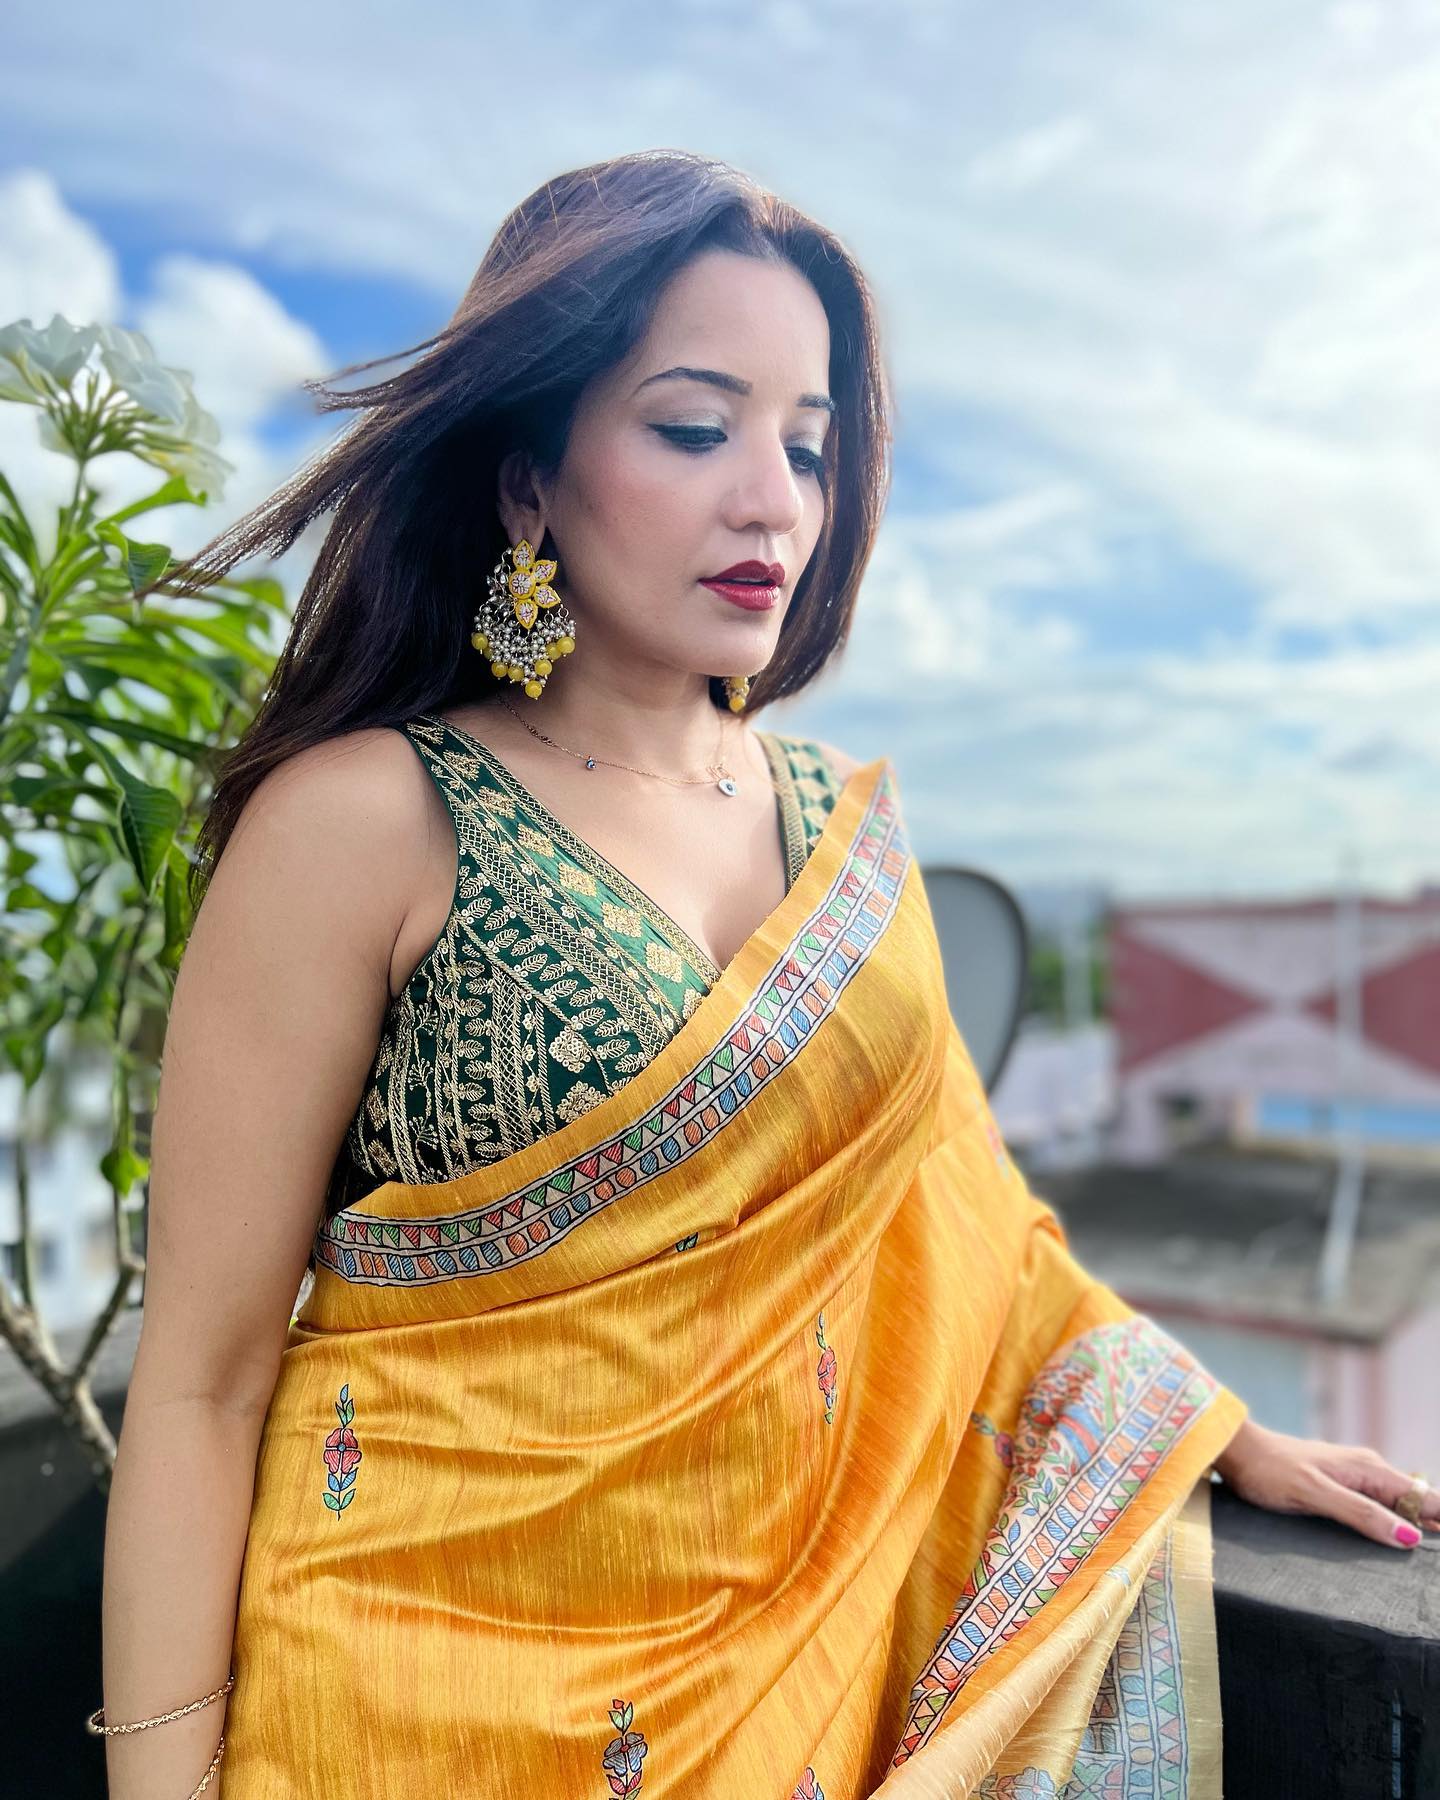 Bhojpuri Actress Monalisa stuns in sequinned saree and deep neck